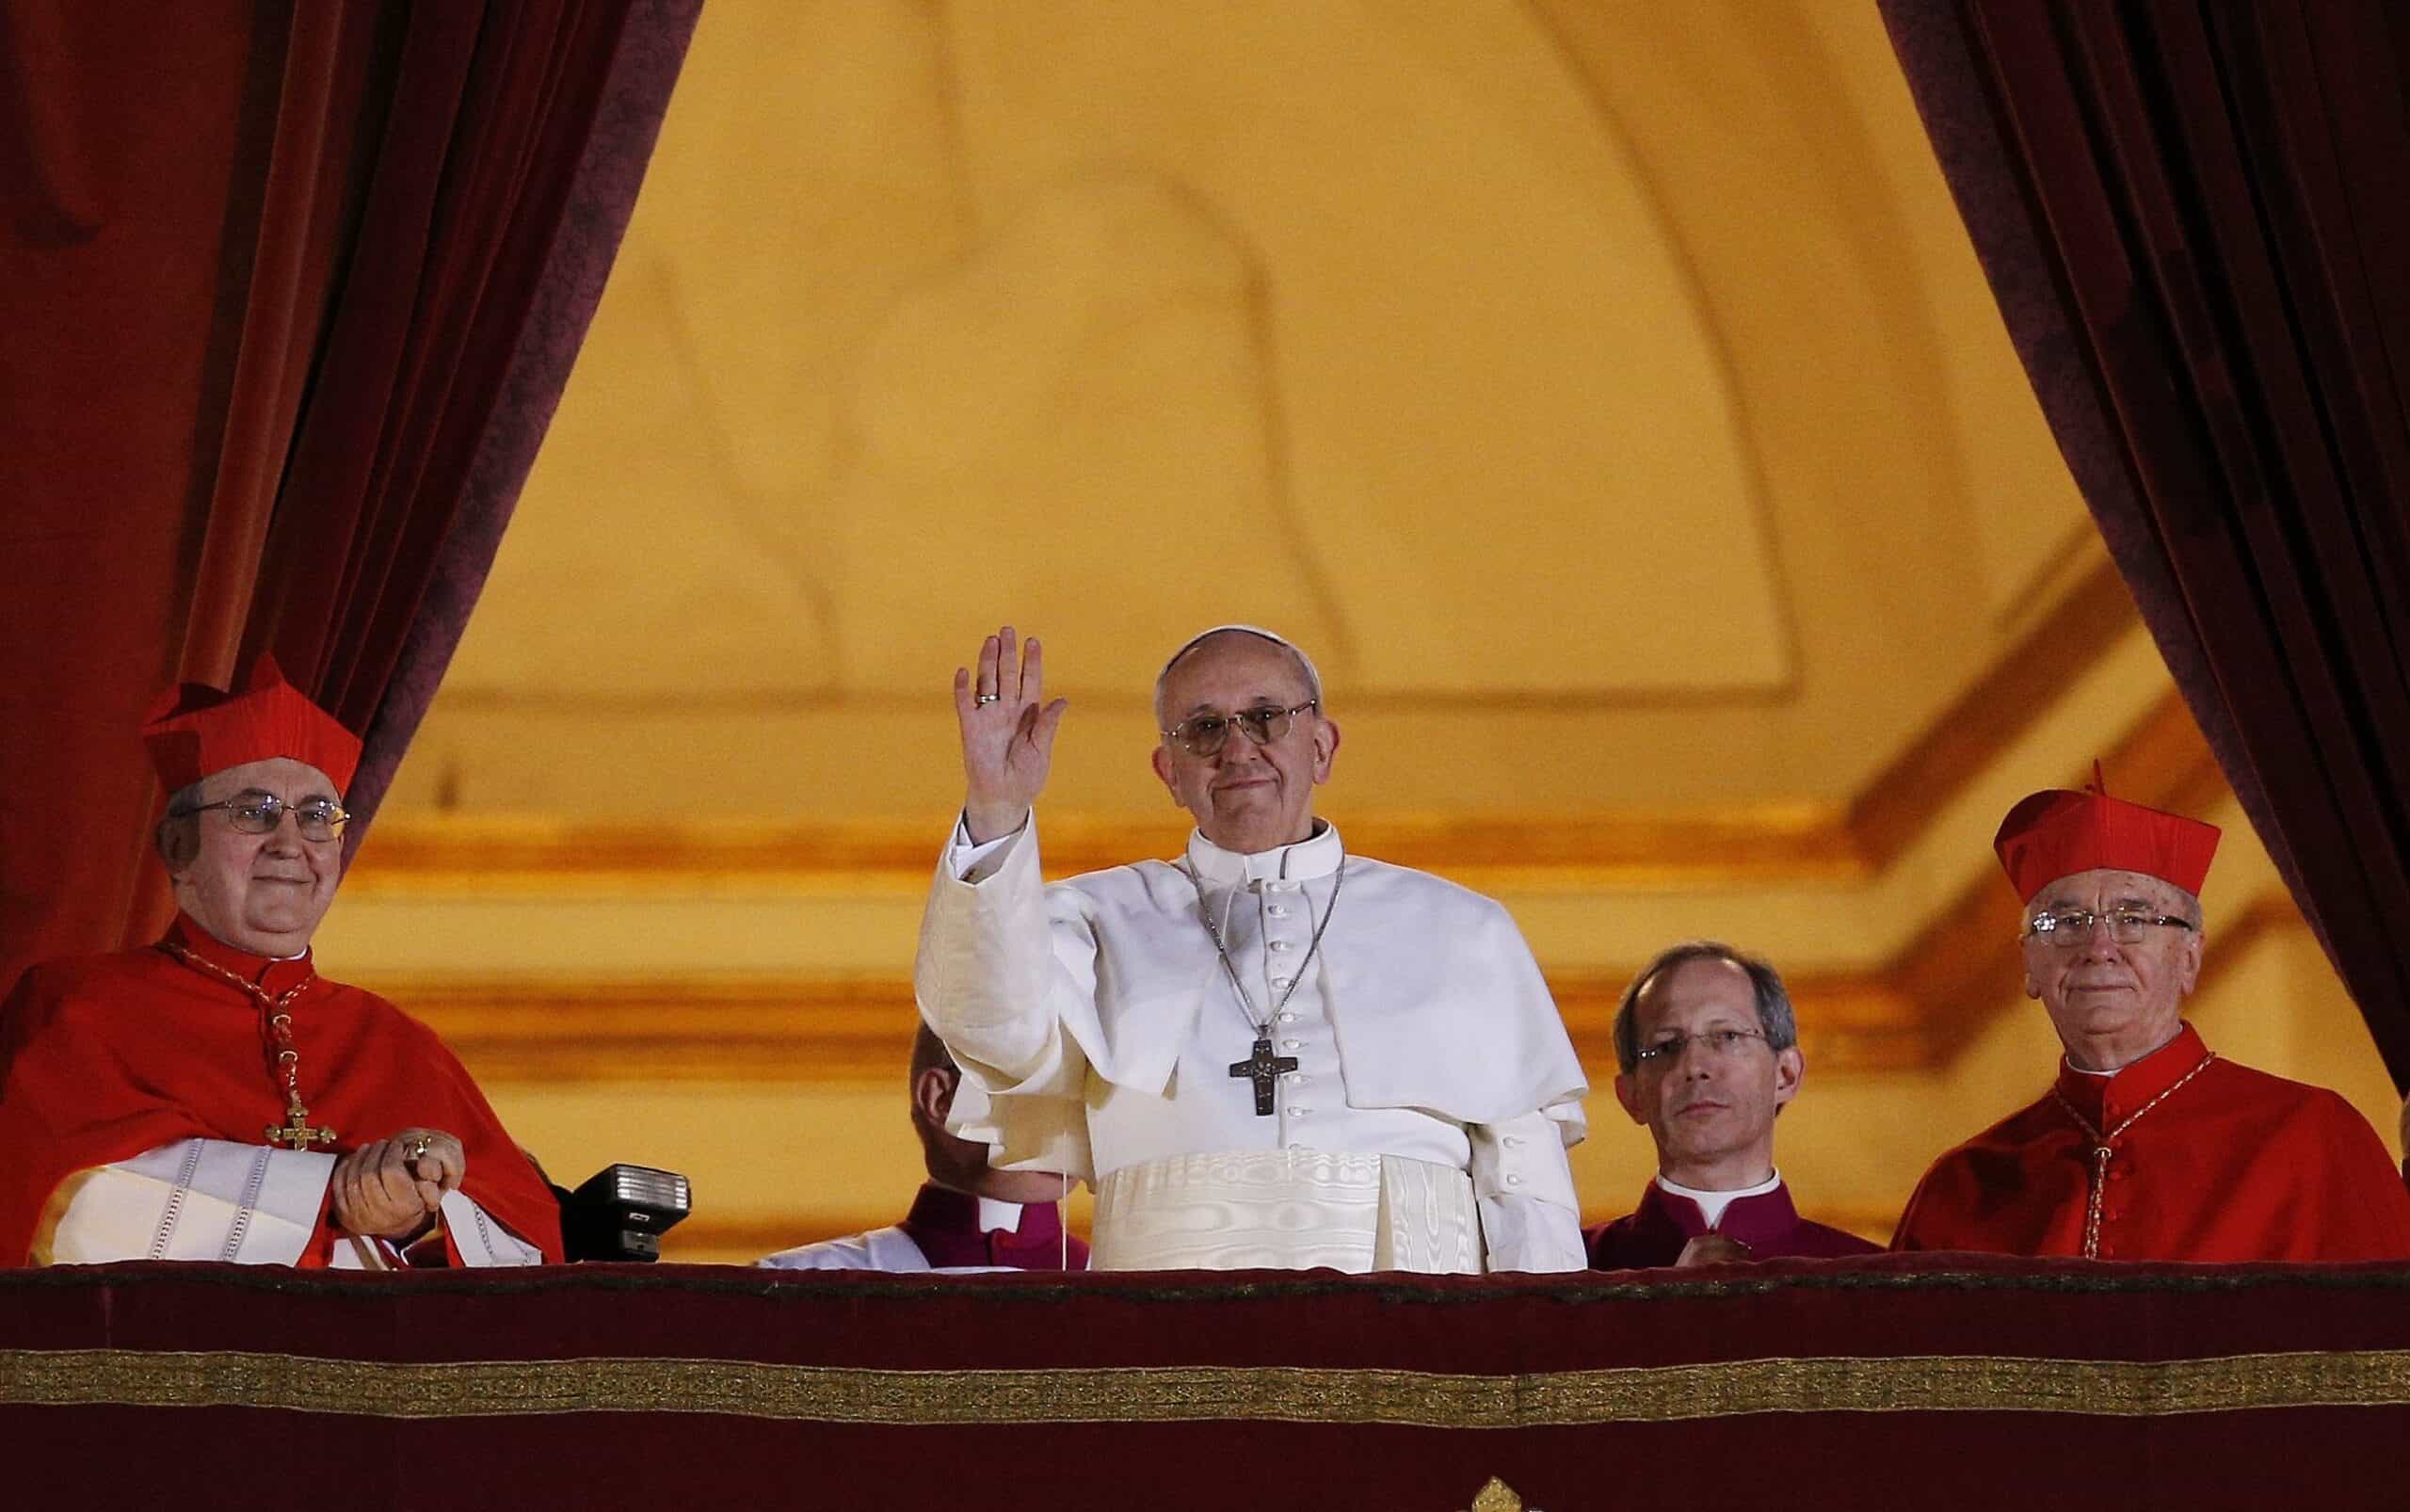 A decade later, Pope Francis' 'Evangelii Gaudium' continues to